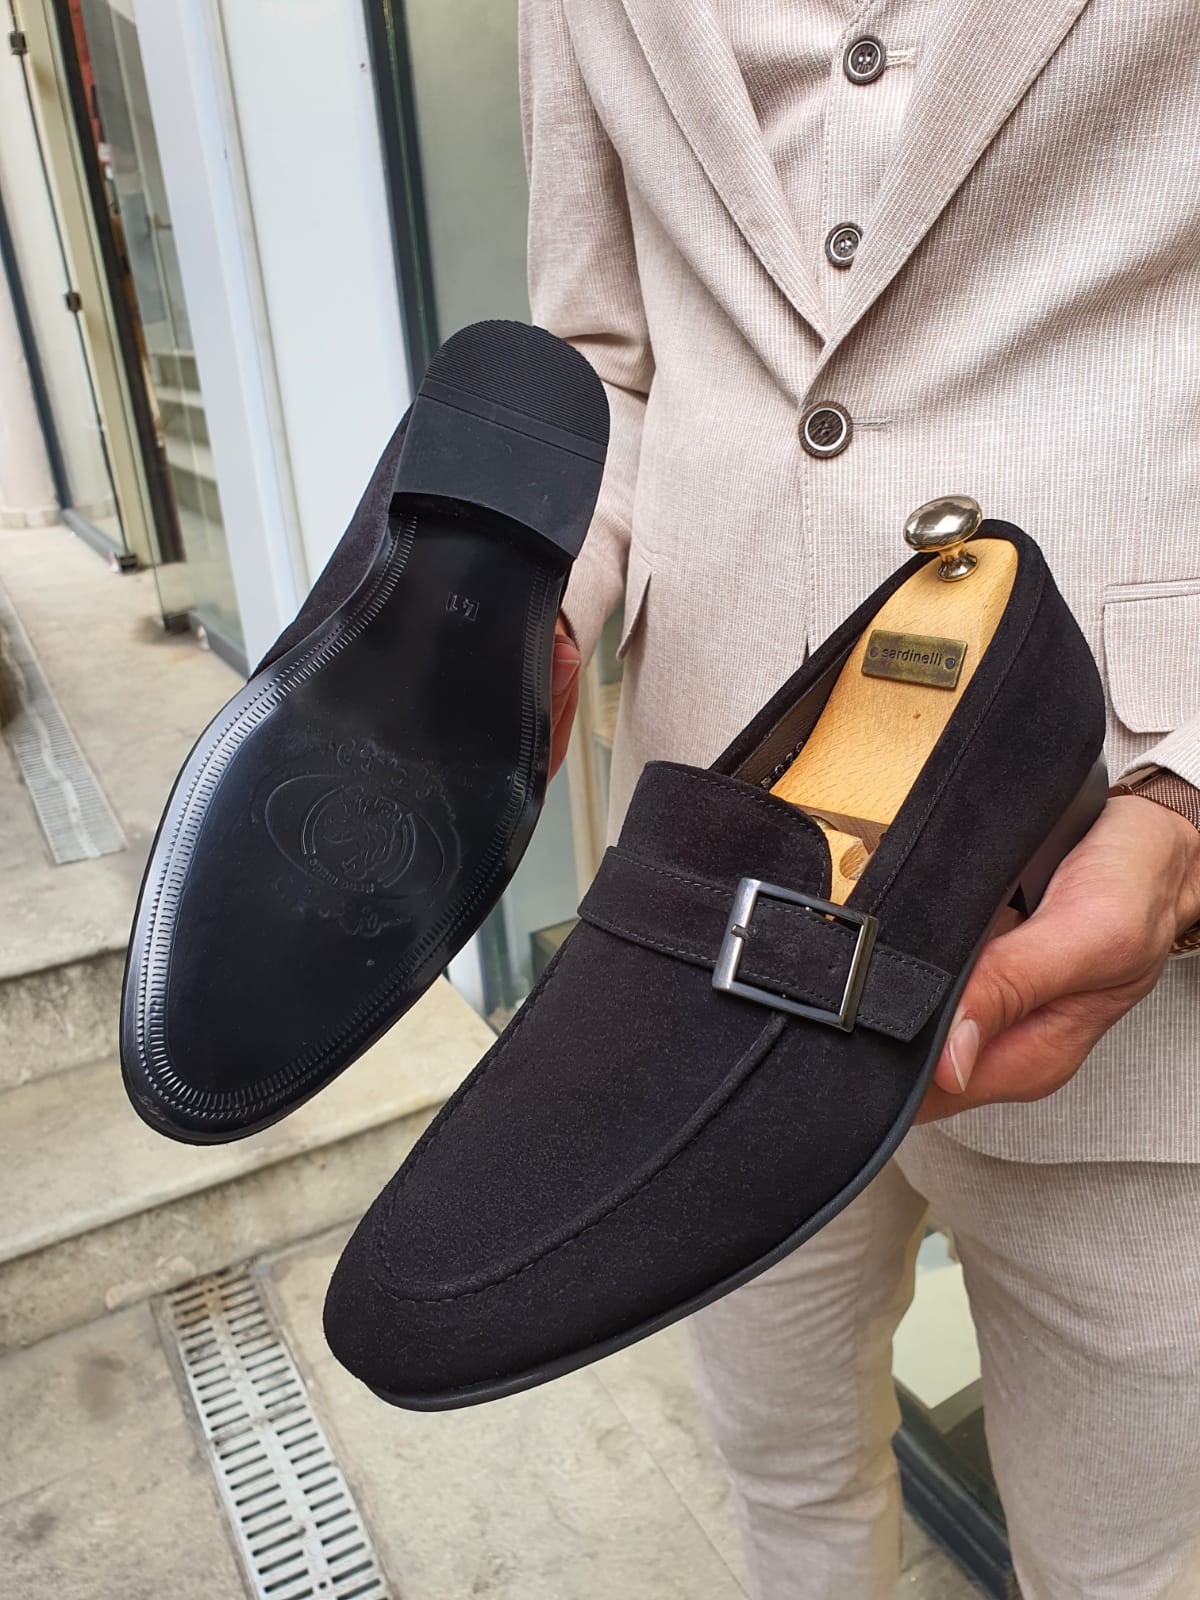 Buy Black Suede Buckle Loafers by Sardinelli | Free Worldwide Shipping